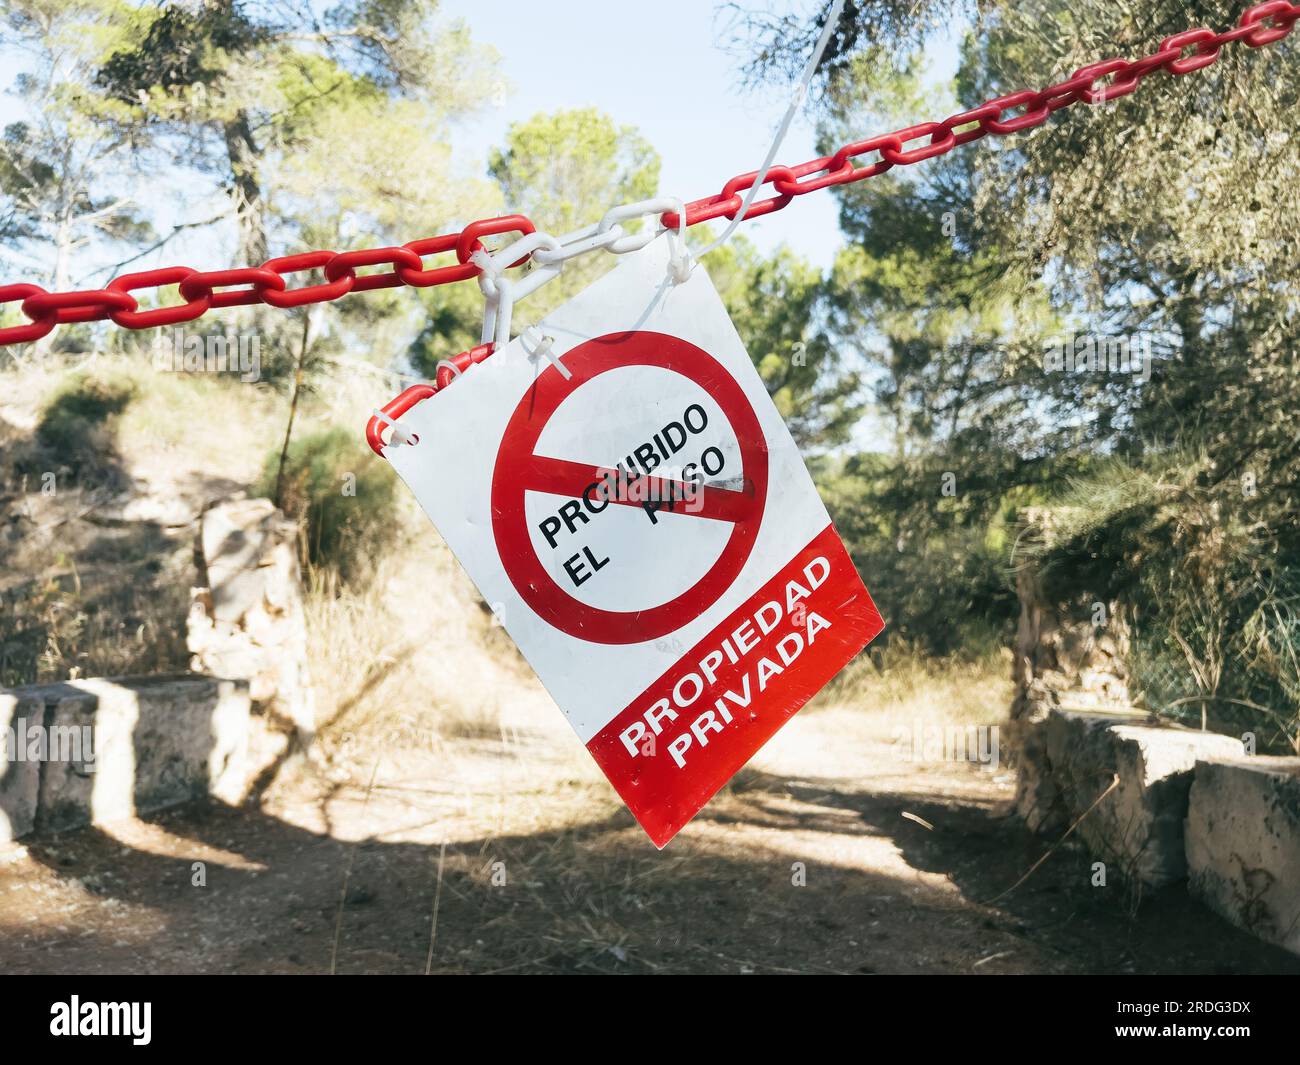 Red warning sign hangs on tree, barring access to private property in spanish language - translated as No trespassing, private property. Ideal for safety communication projects. Stock Photo